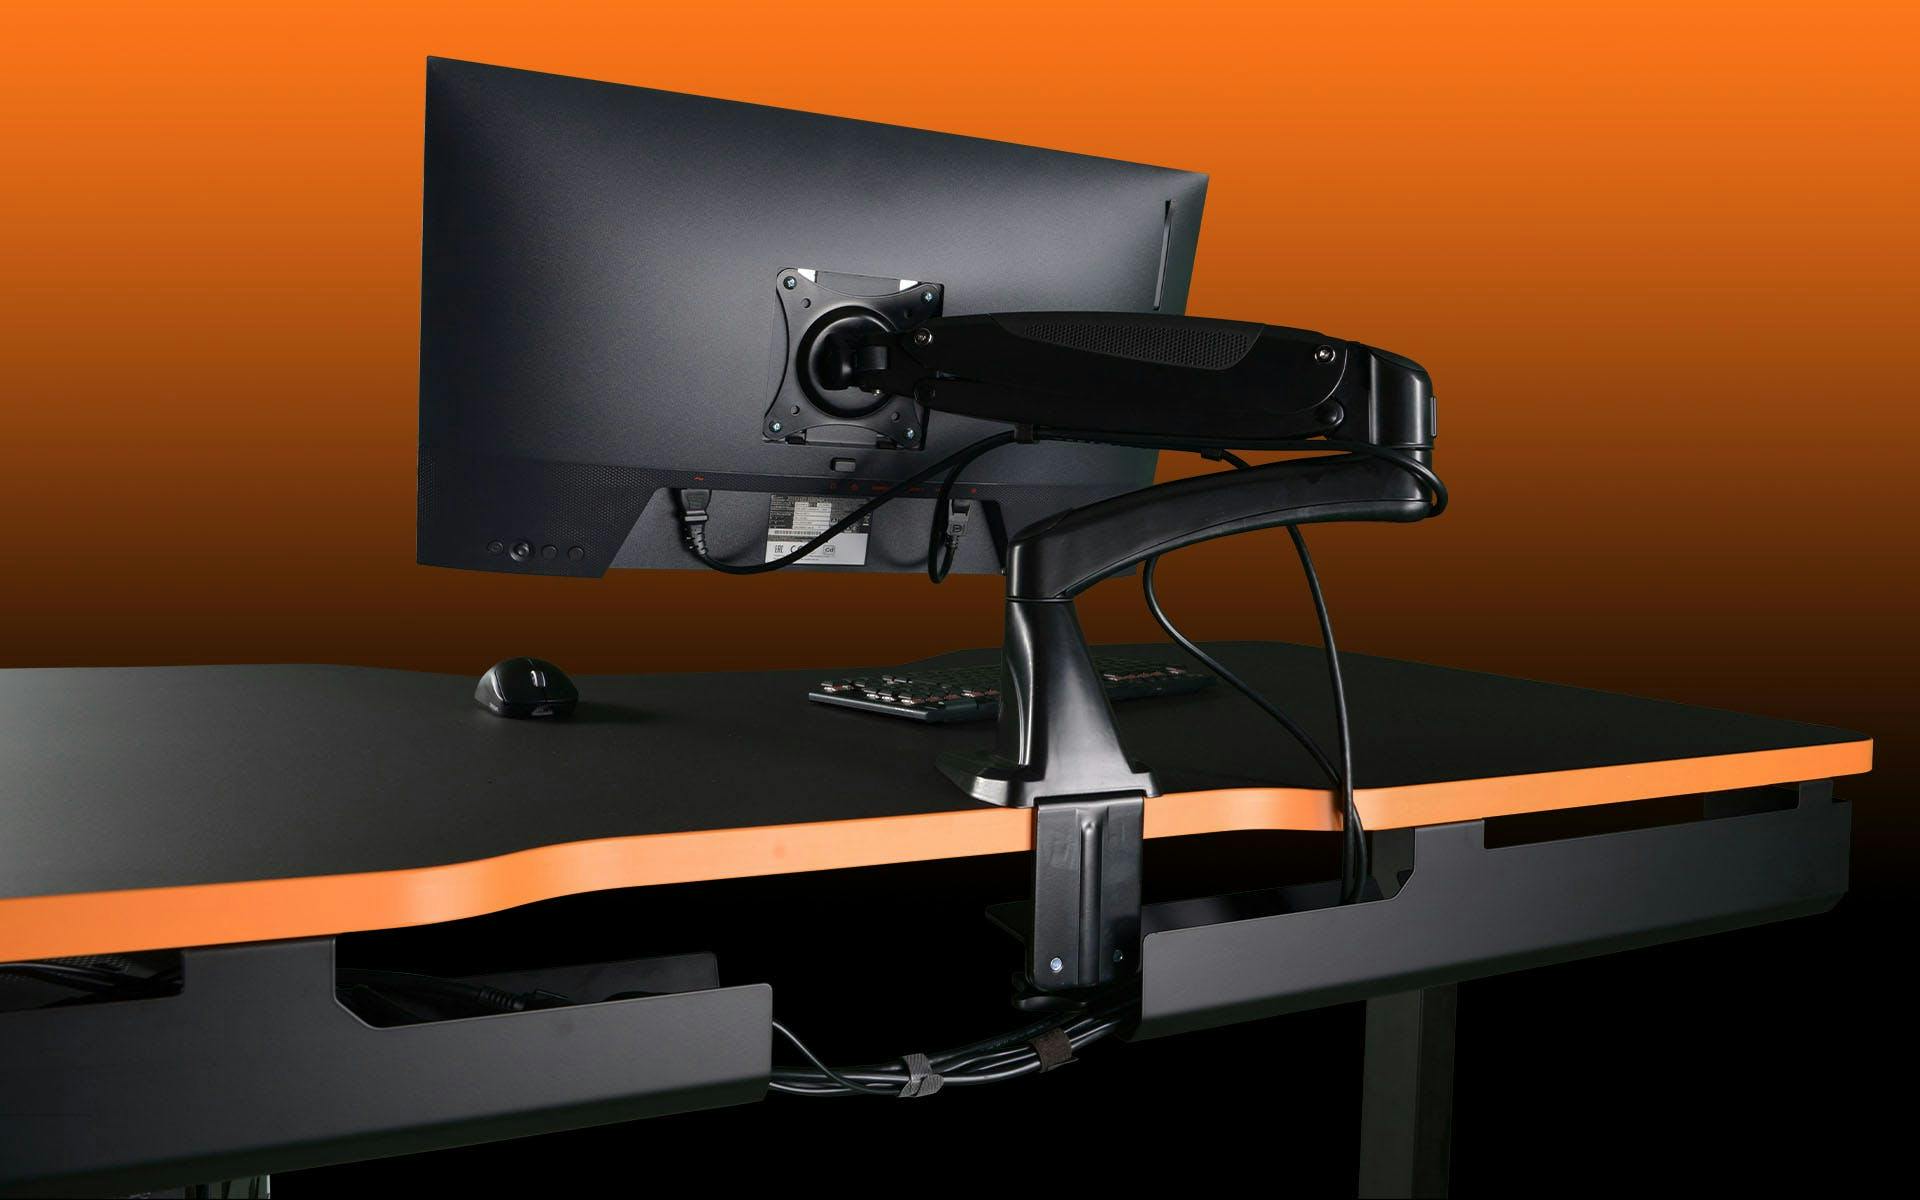 Cable management on the gaming desk